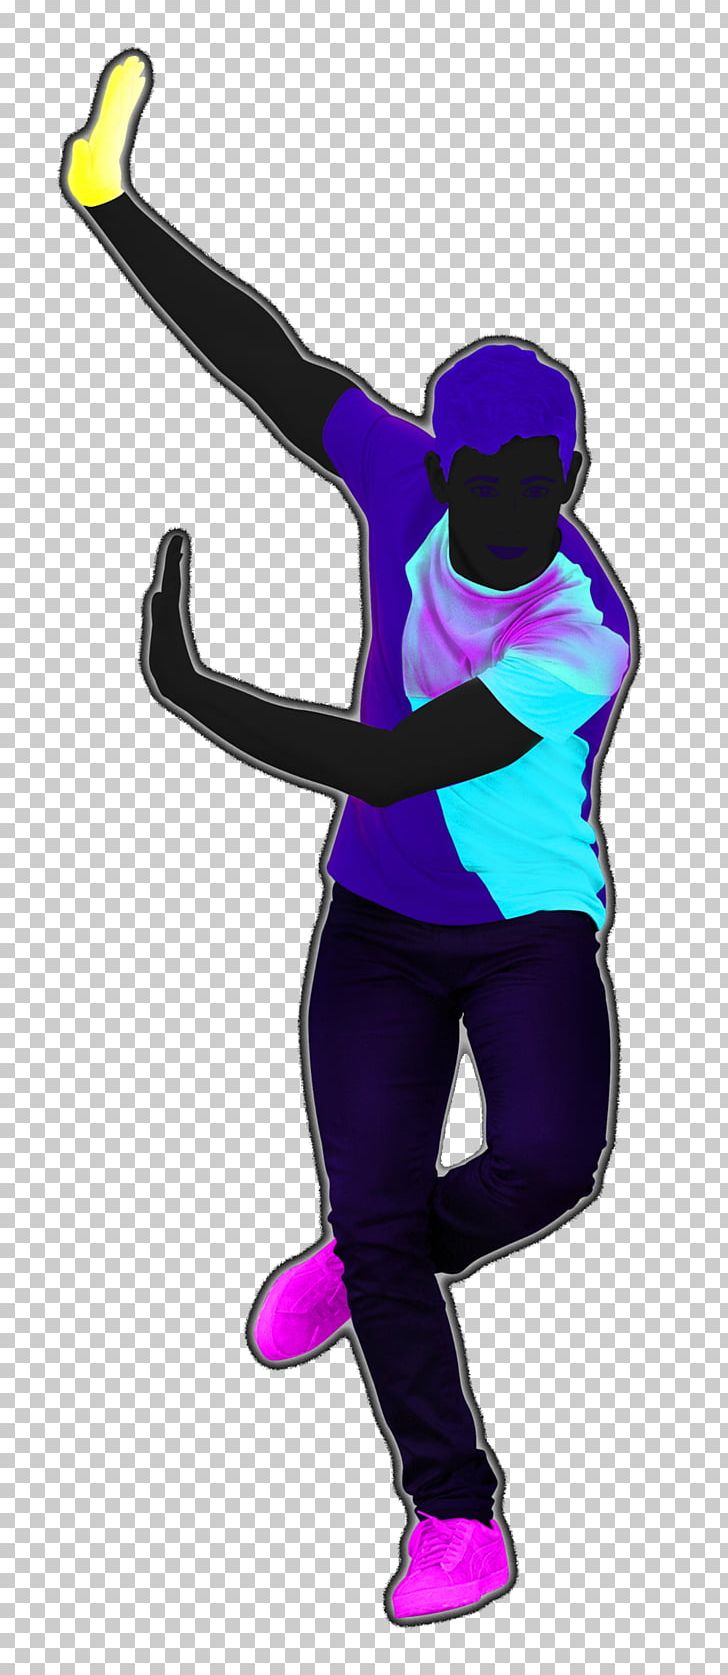 Just Dance Now Just Dance 2014 Just Dance 2018 PNG, Clipart, Arm, Baseball Equipment, Costume, Dance, Dance Party Free PNG Download